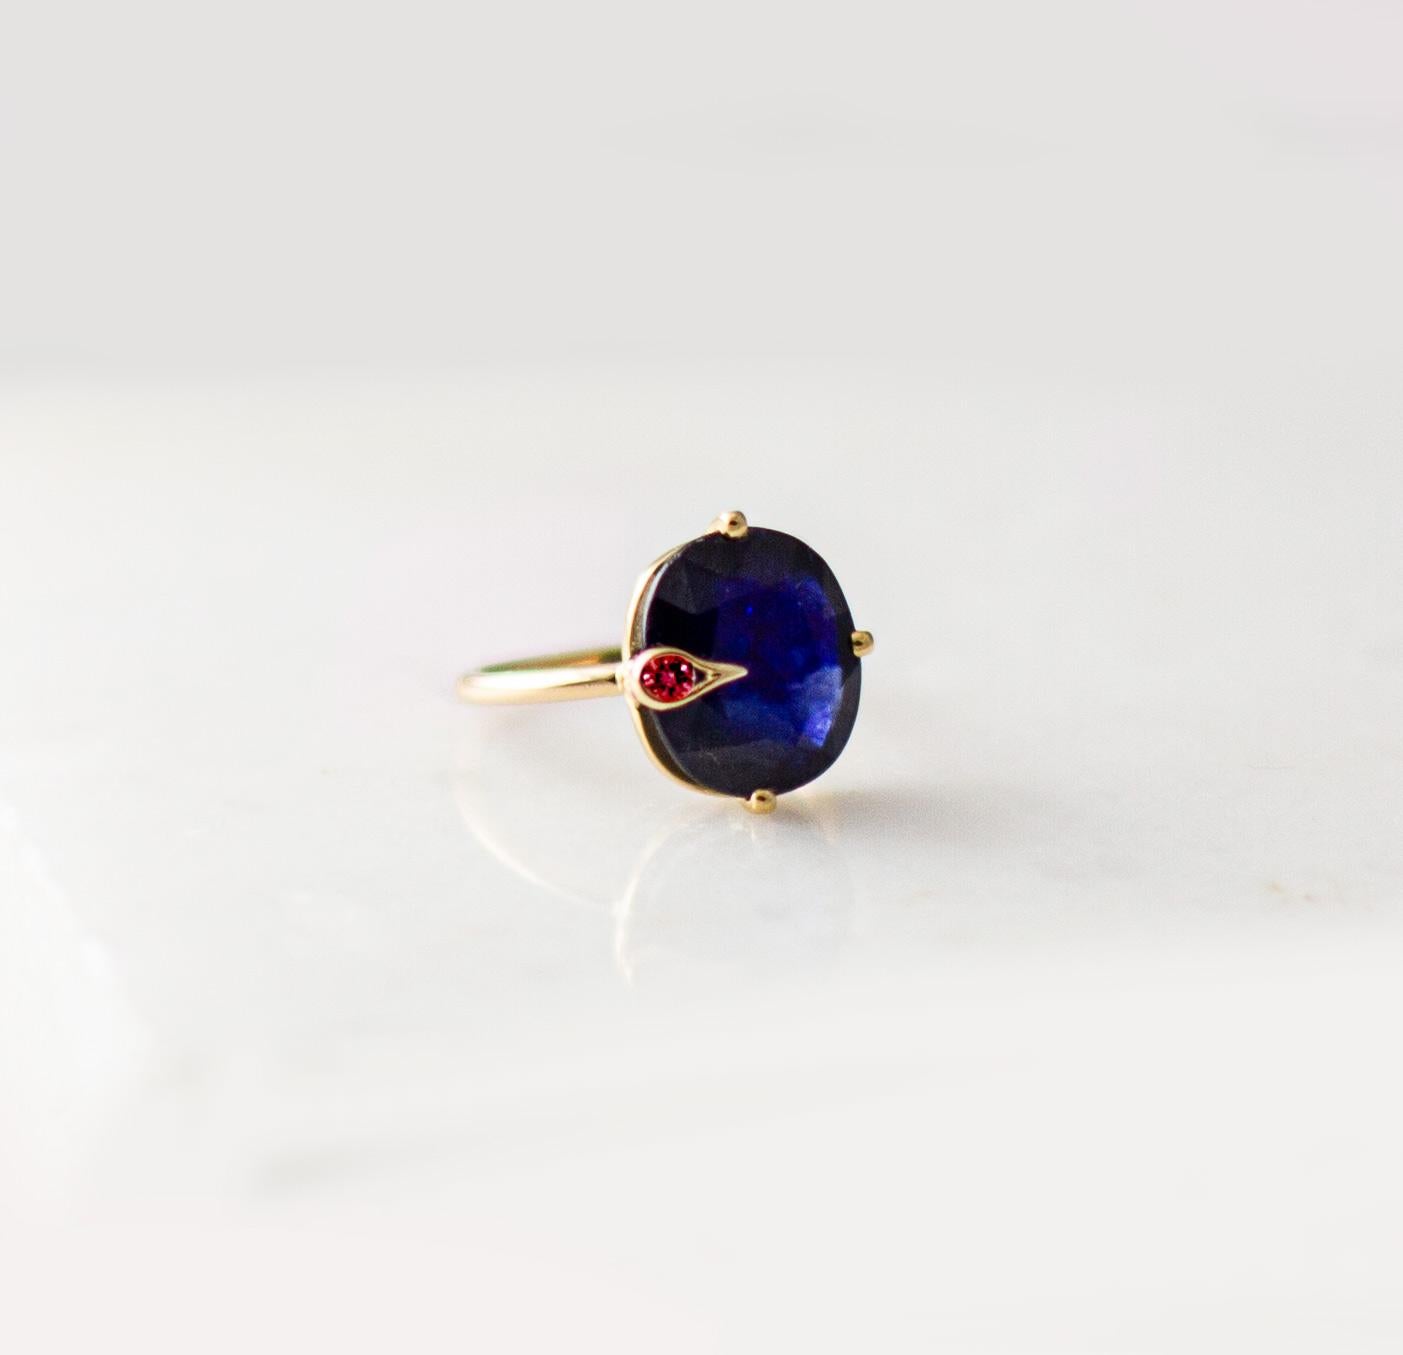 This contemporary engagement Peacock ring is in 18 karat yellow gold with unheated natural cushion cut blue sapphire, 2,55 carats, 0,35x0,3 inches / 9x7,8 mm, and round ruby. The ring is easy to wear, and the gem catches eye's attention. 
The